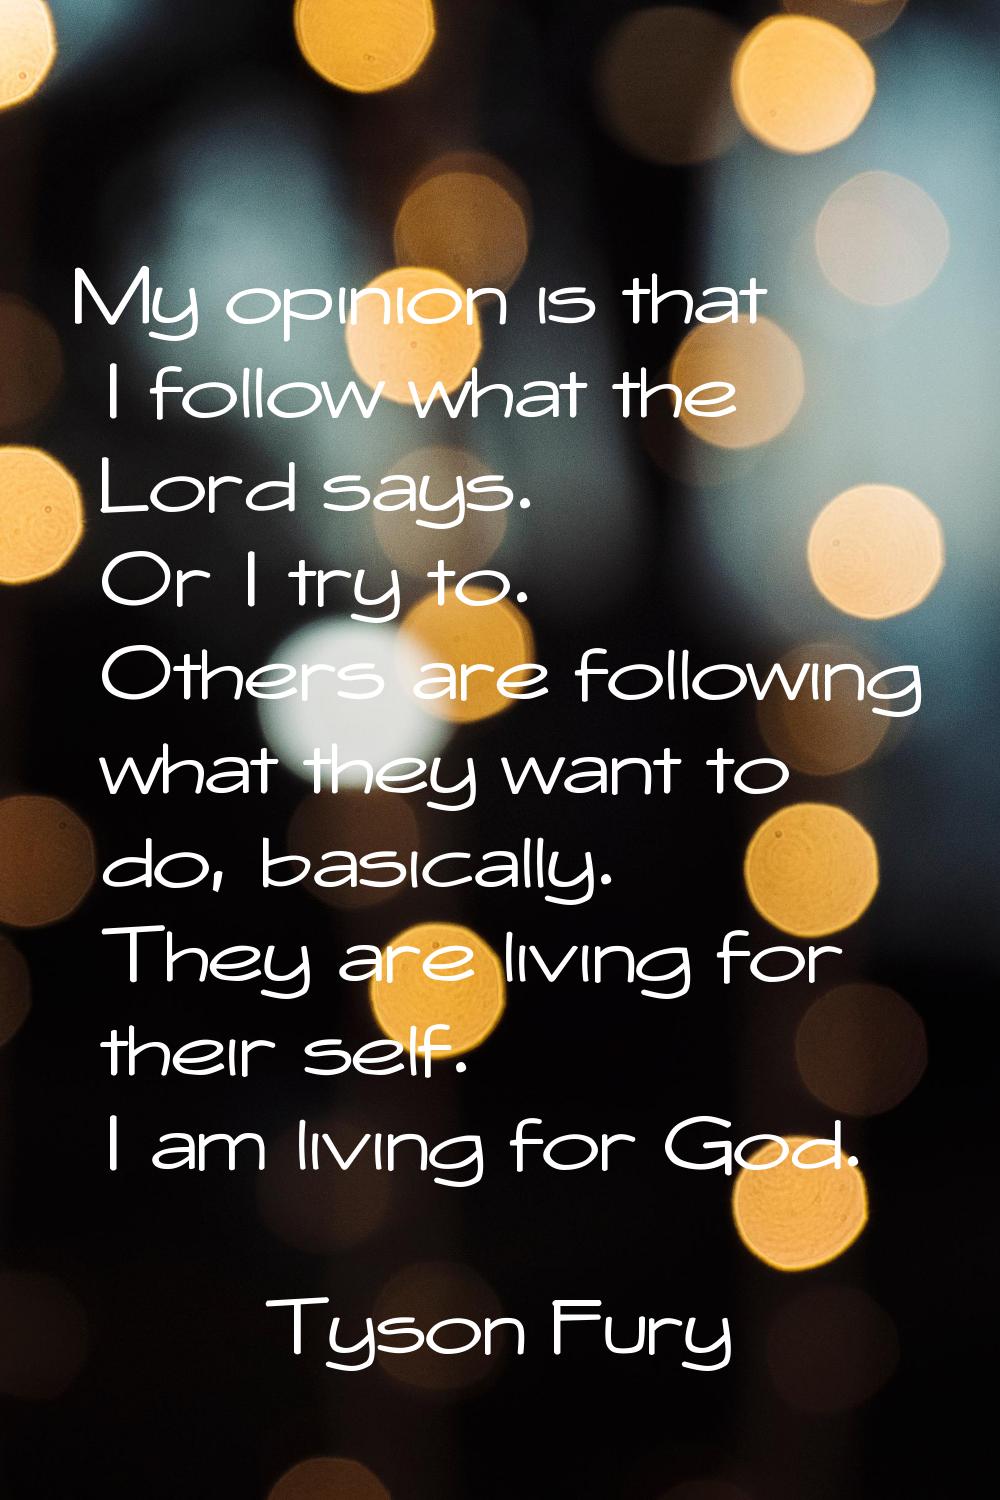 My opinion is that I follow what the Lord says. Or I try to. Others are following what they want to